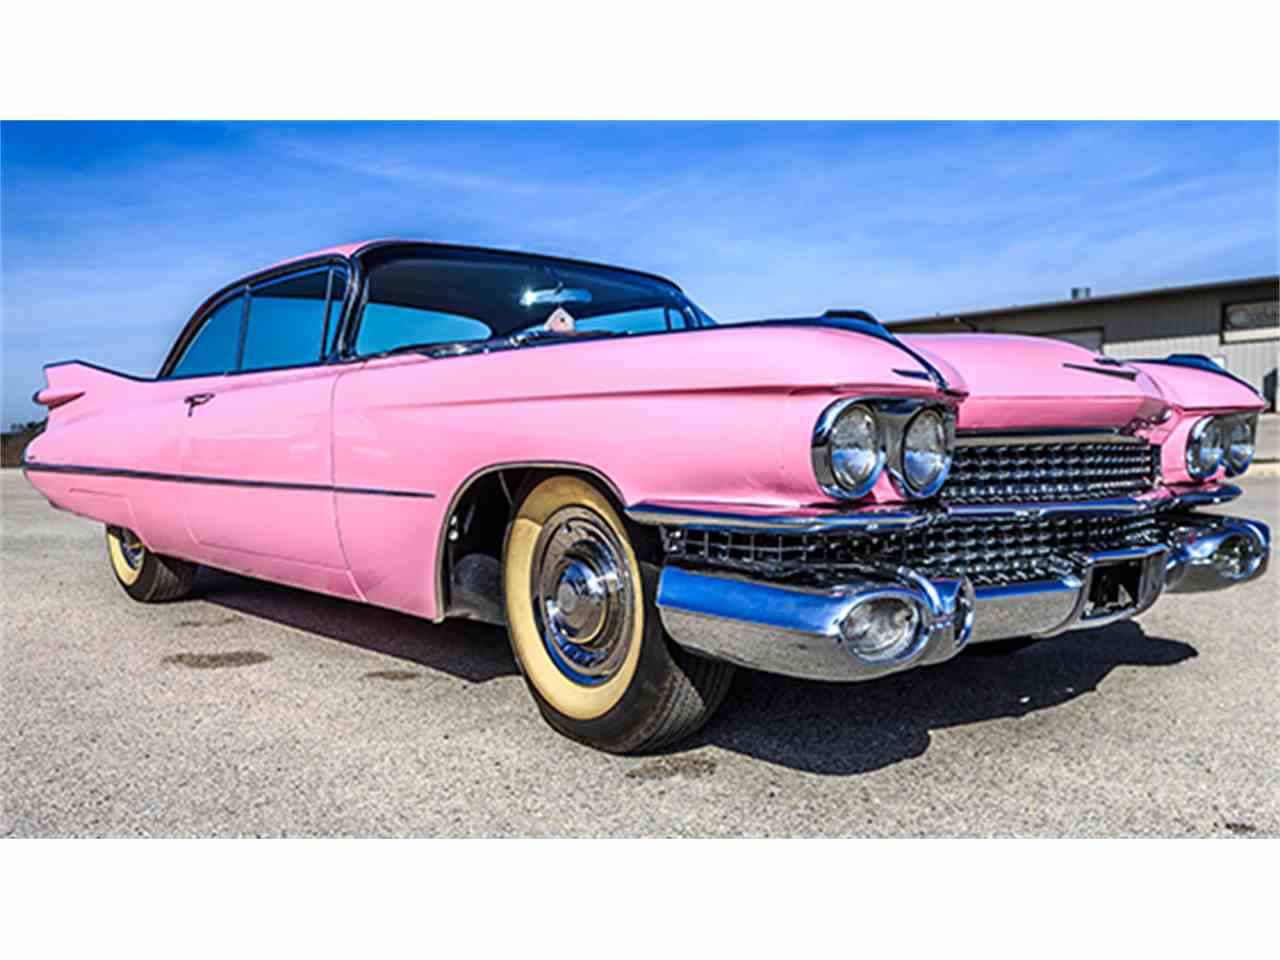 1959 Cadillac Coupe Deville HD wallpapers, Desktop wallpaper - most viewed